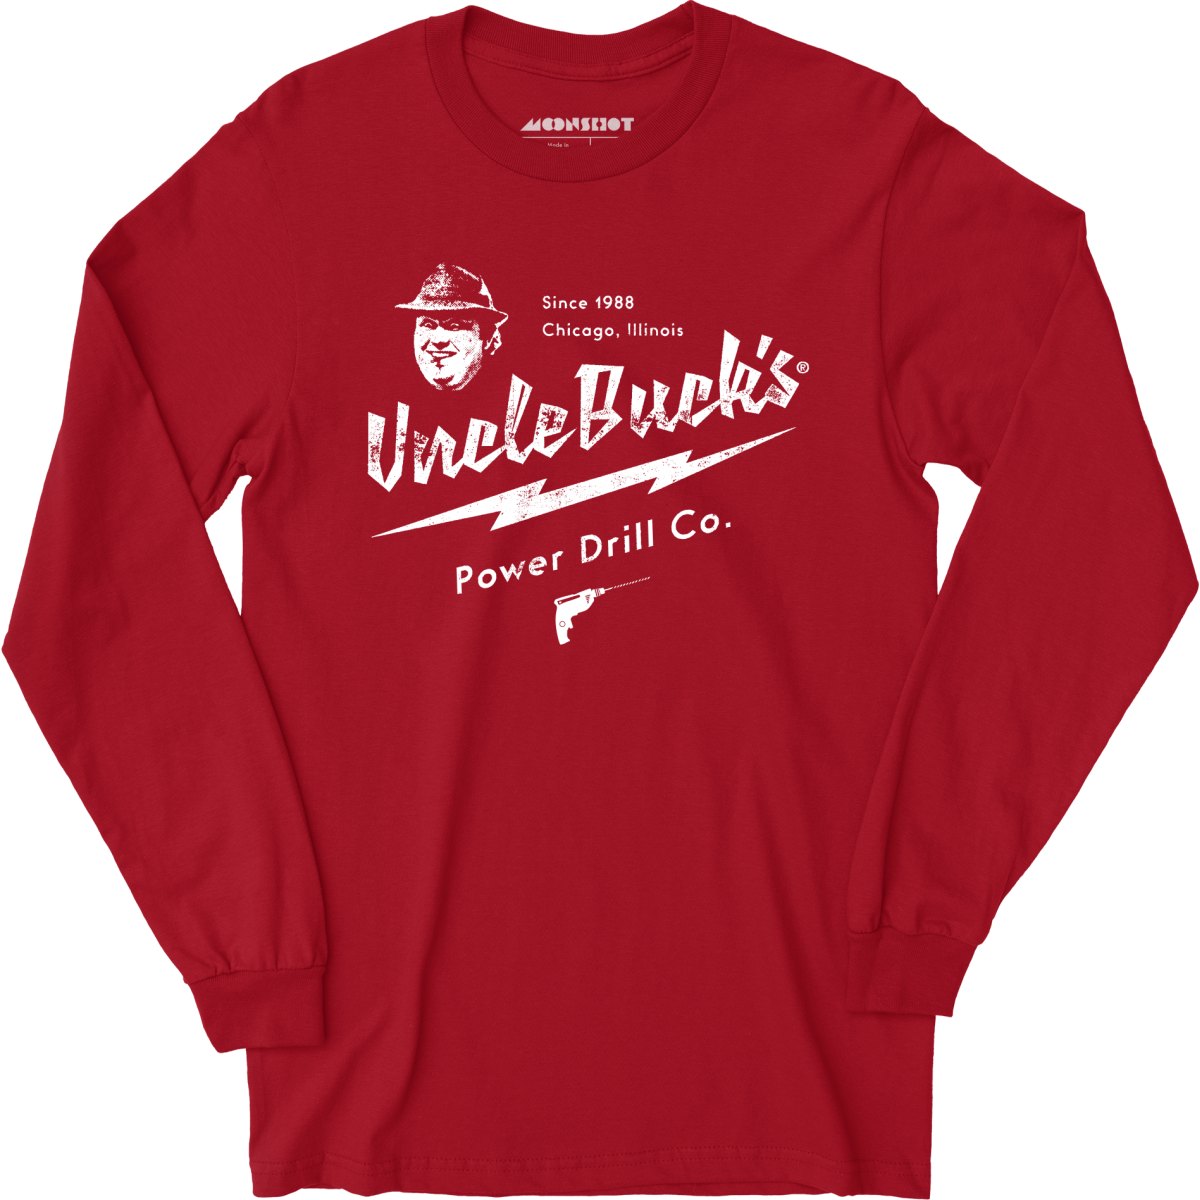 Uncle Buck's Power Drill Co. - Long Sleeve T-Shirt